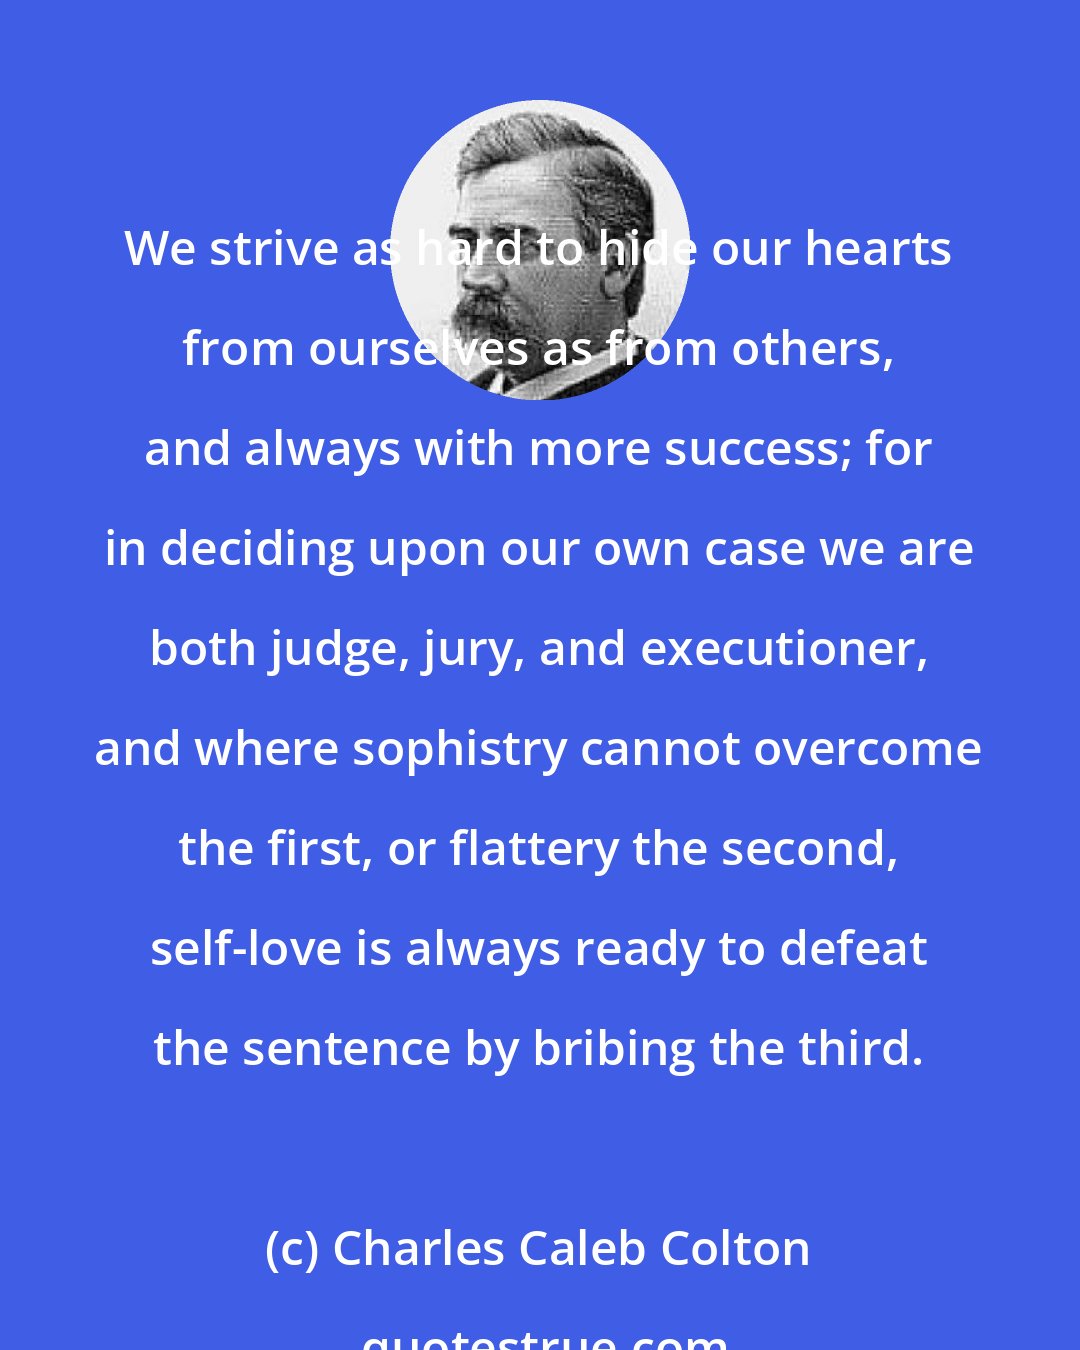 Charles Caleb Colton: We strive as hard to hide our hearts from ourselves as from others, and always with more success; for in deciding upon our own case we are both judge, jury, and executioner, and where sophistry cannot overcome the first, or flattery the second, self-love is always ready to defeat the sentence by bribing the third.